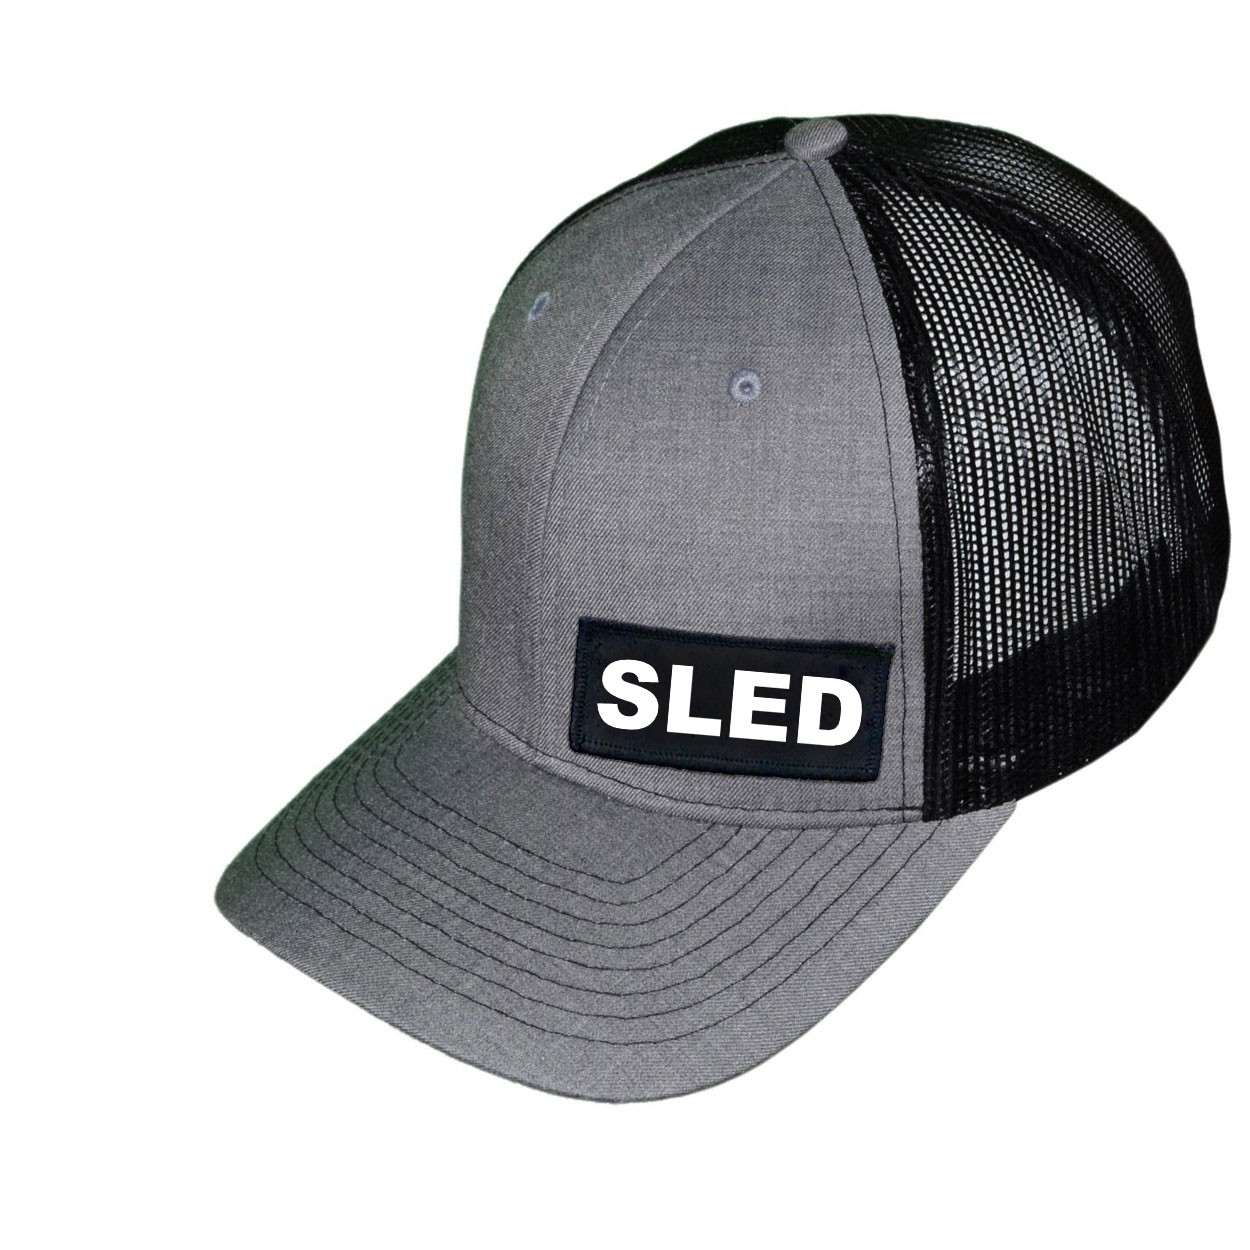 Sled Brand Logo Night Out Woven Patch Snapback Trucker Hat Heather Gray/Black